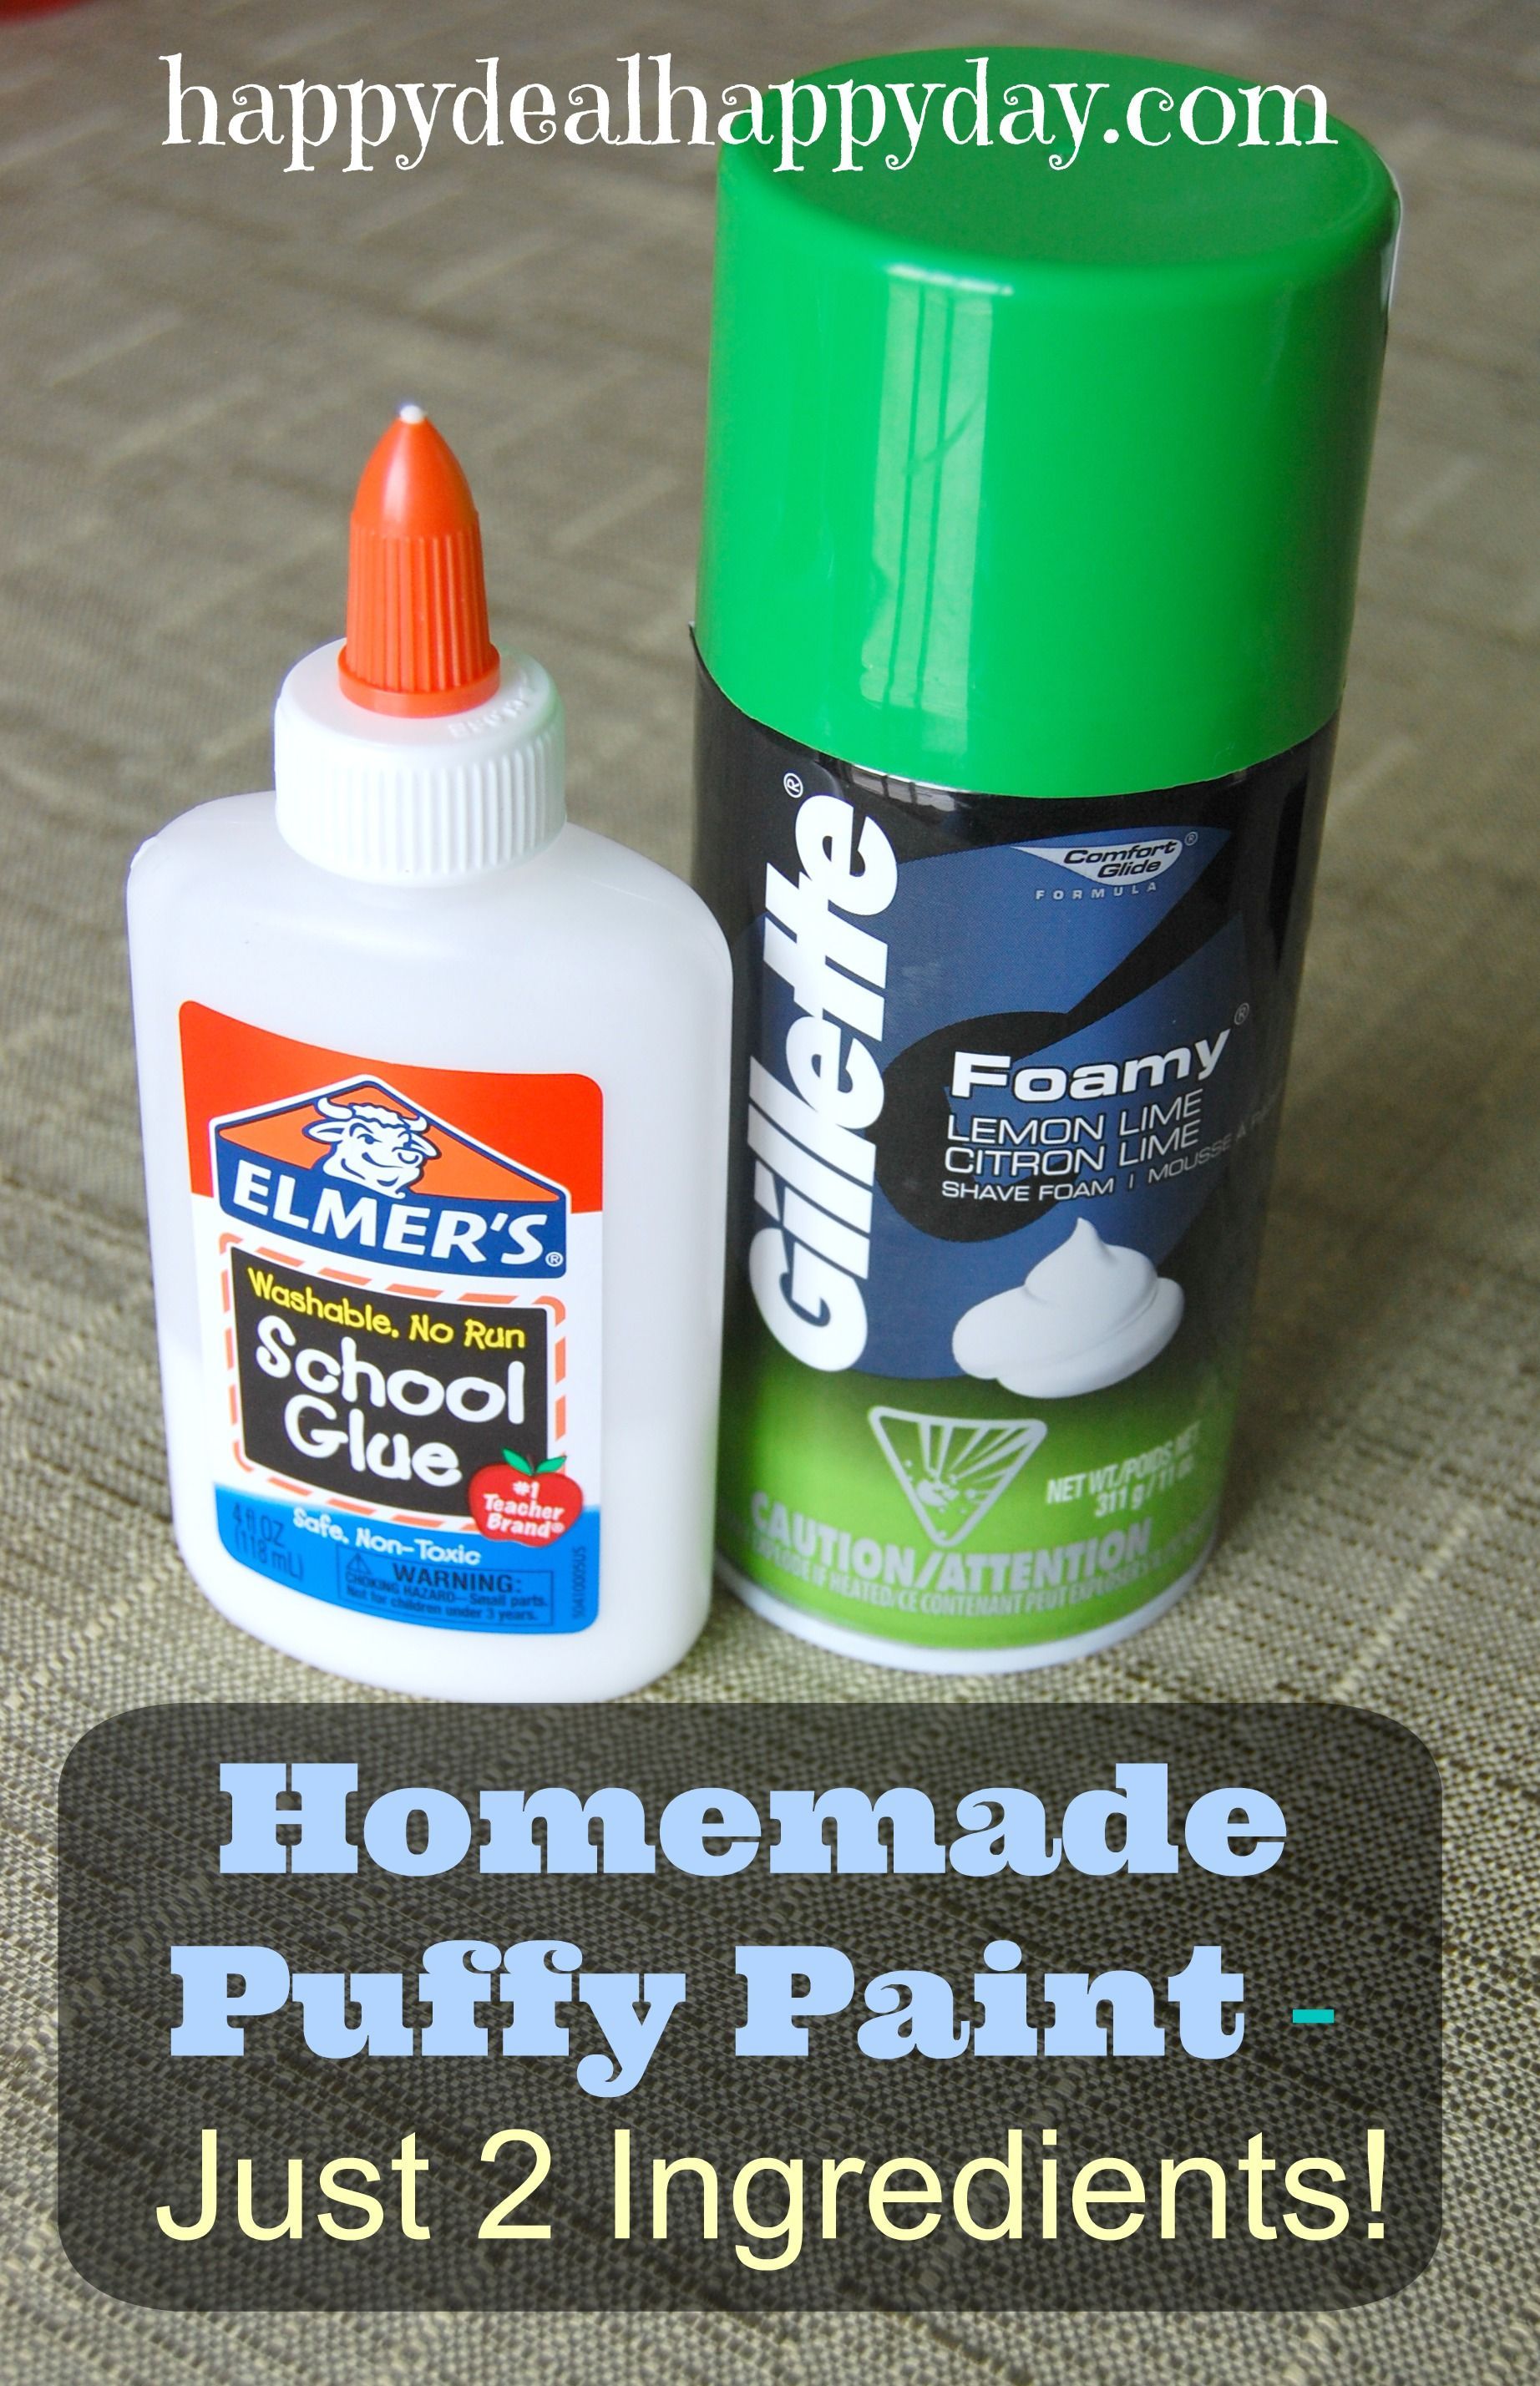 Kids Crafts: Homemade Puffy Paint with Shaving Cream - Just 2 Ingredients - Super Easy -   24 homemade crafts supplies
 ideas